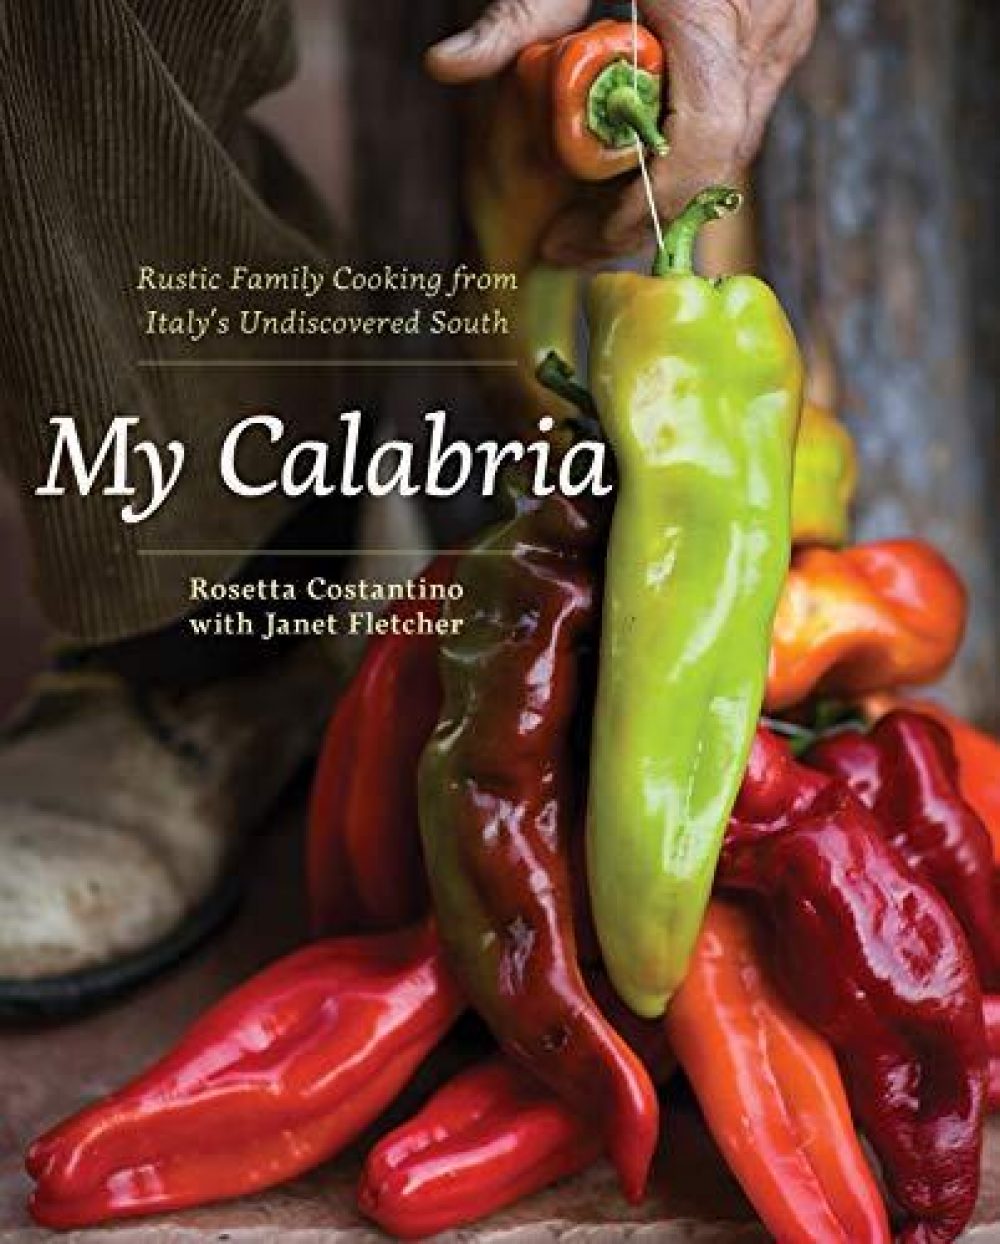 My Calabria By Rosetta Costantino with Janet Fletcher